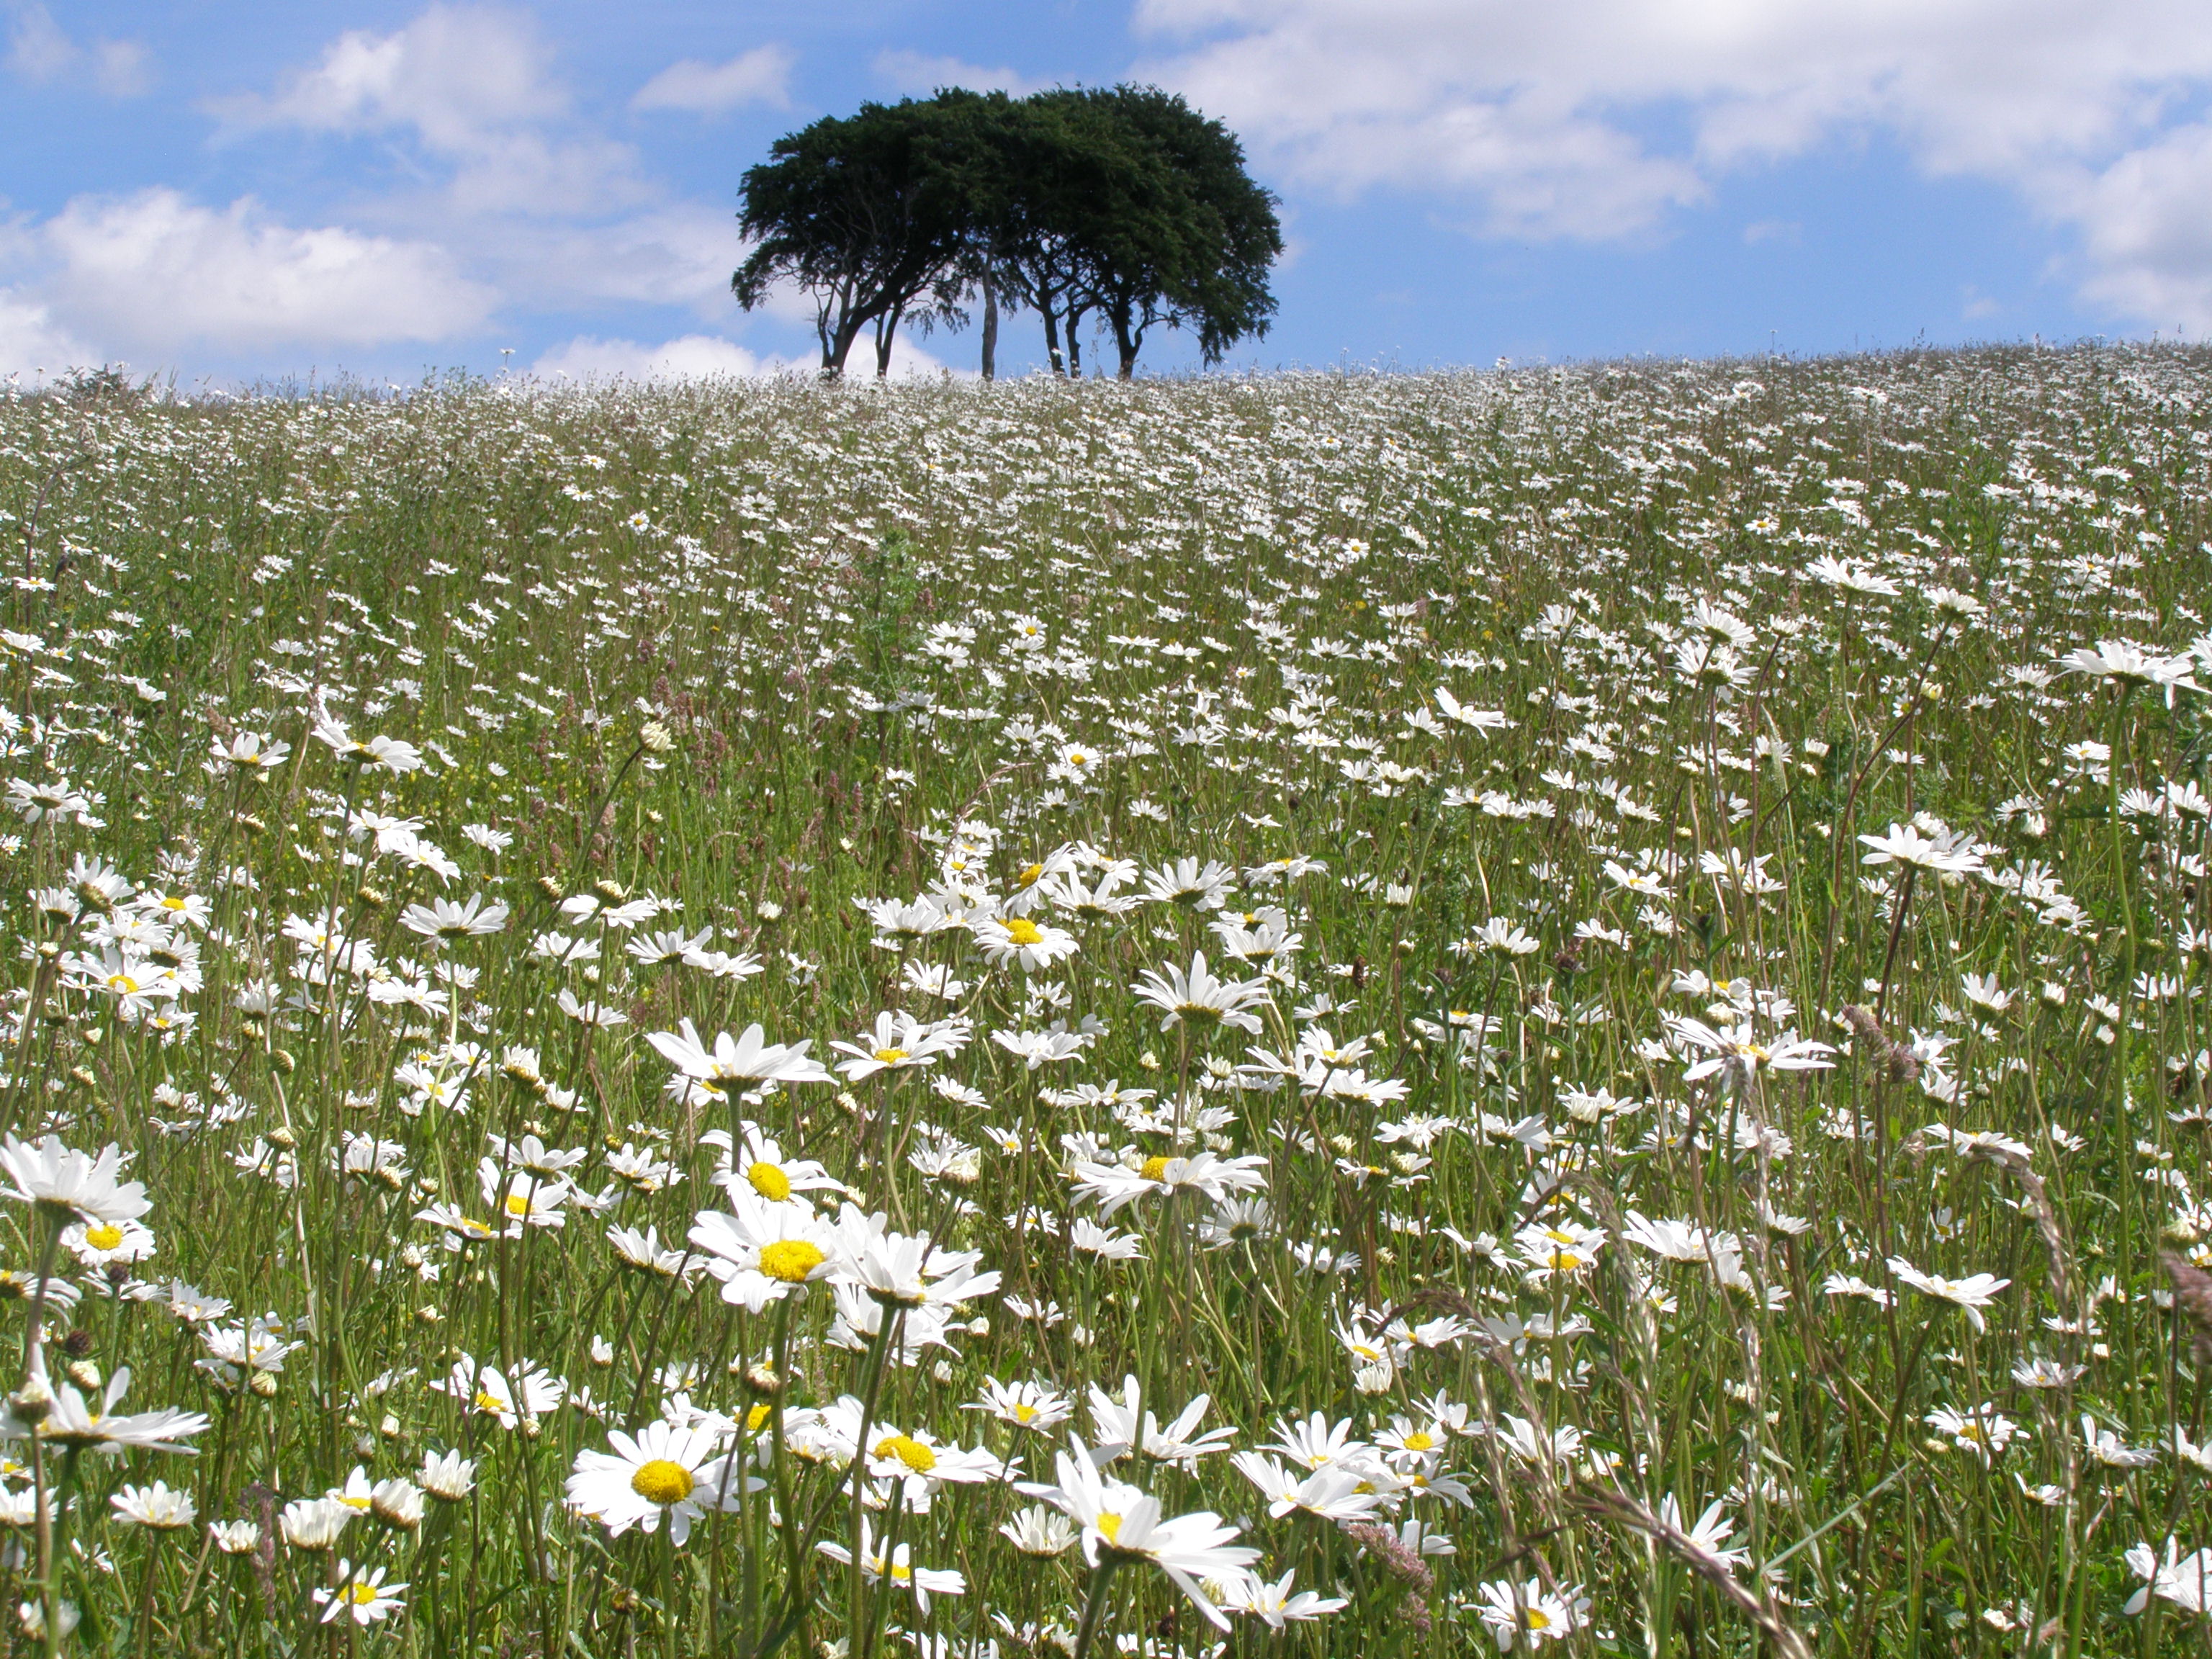 The 'rivers of wildflowers' the routes could create would help wildlife move through the landscape (Leanna Dixon)